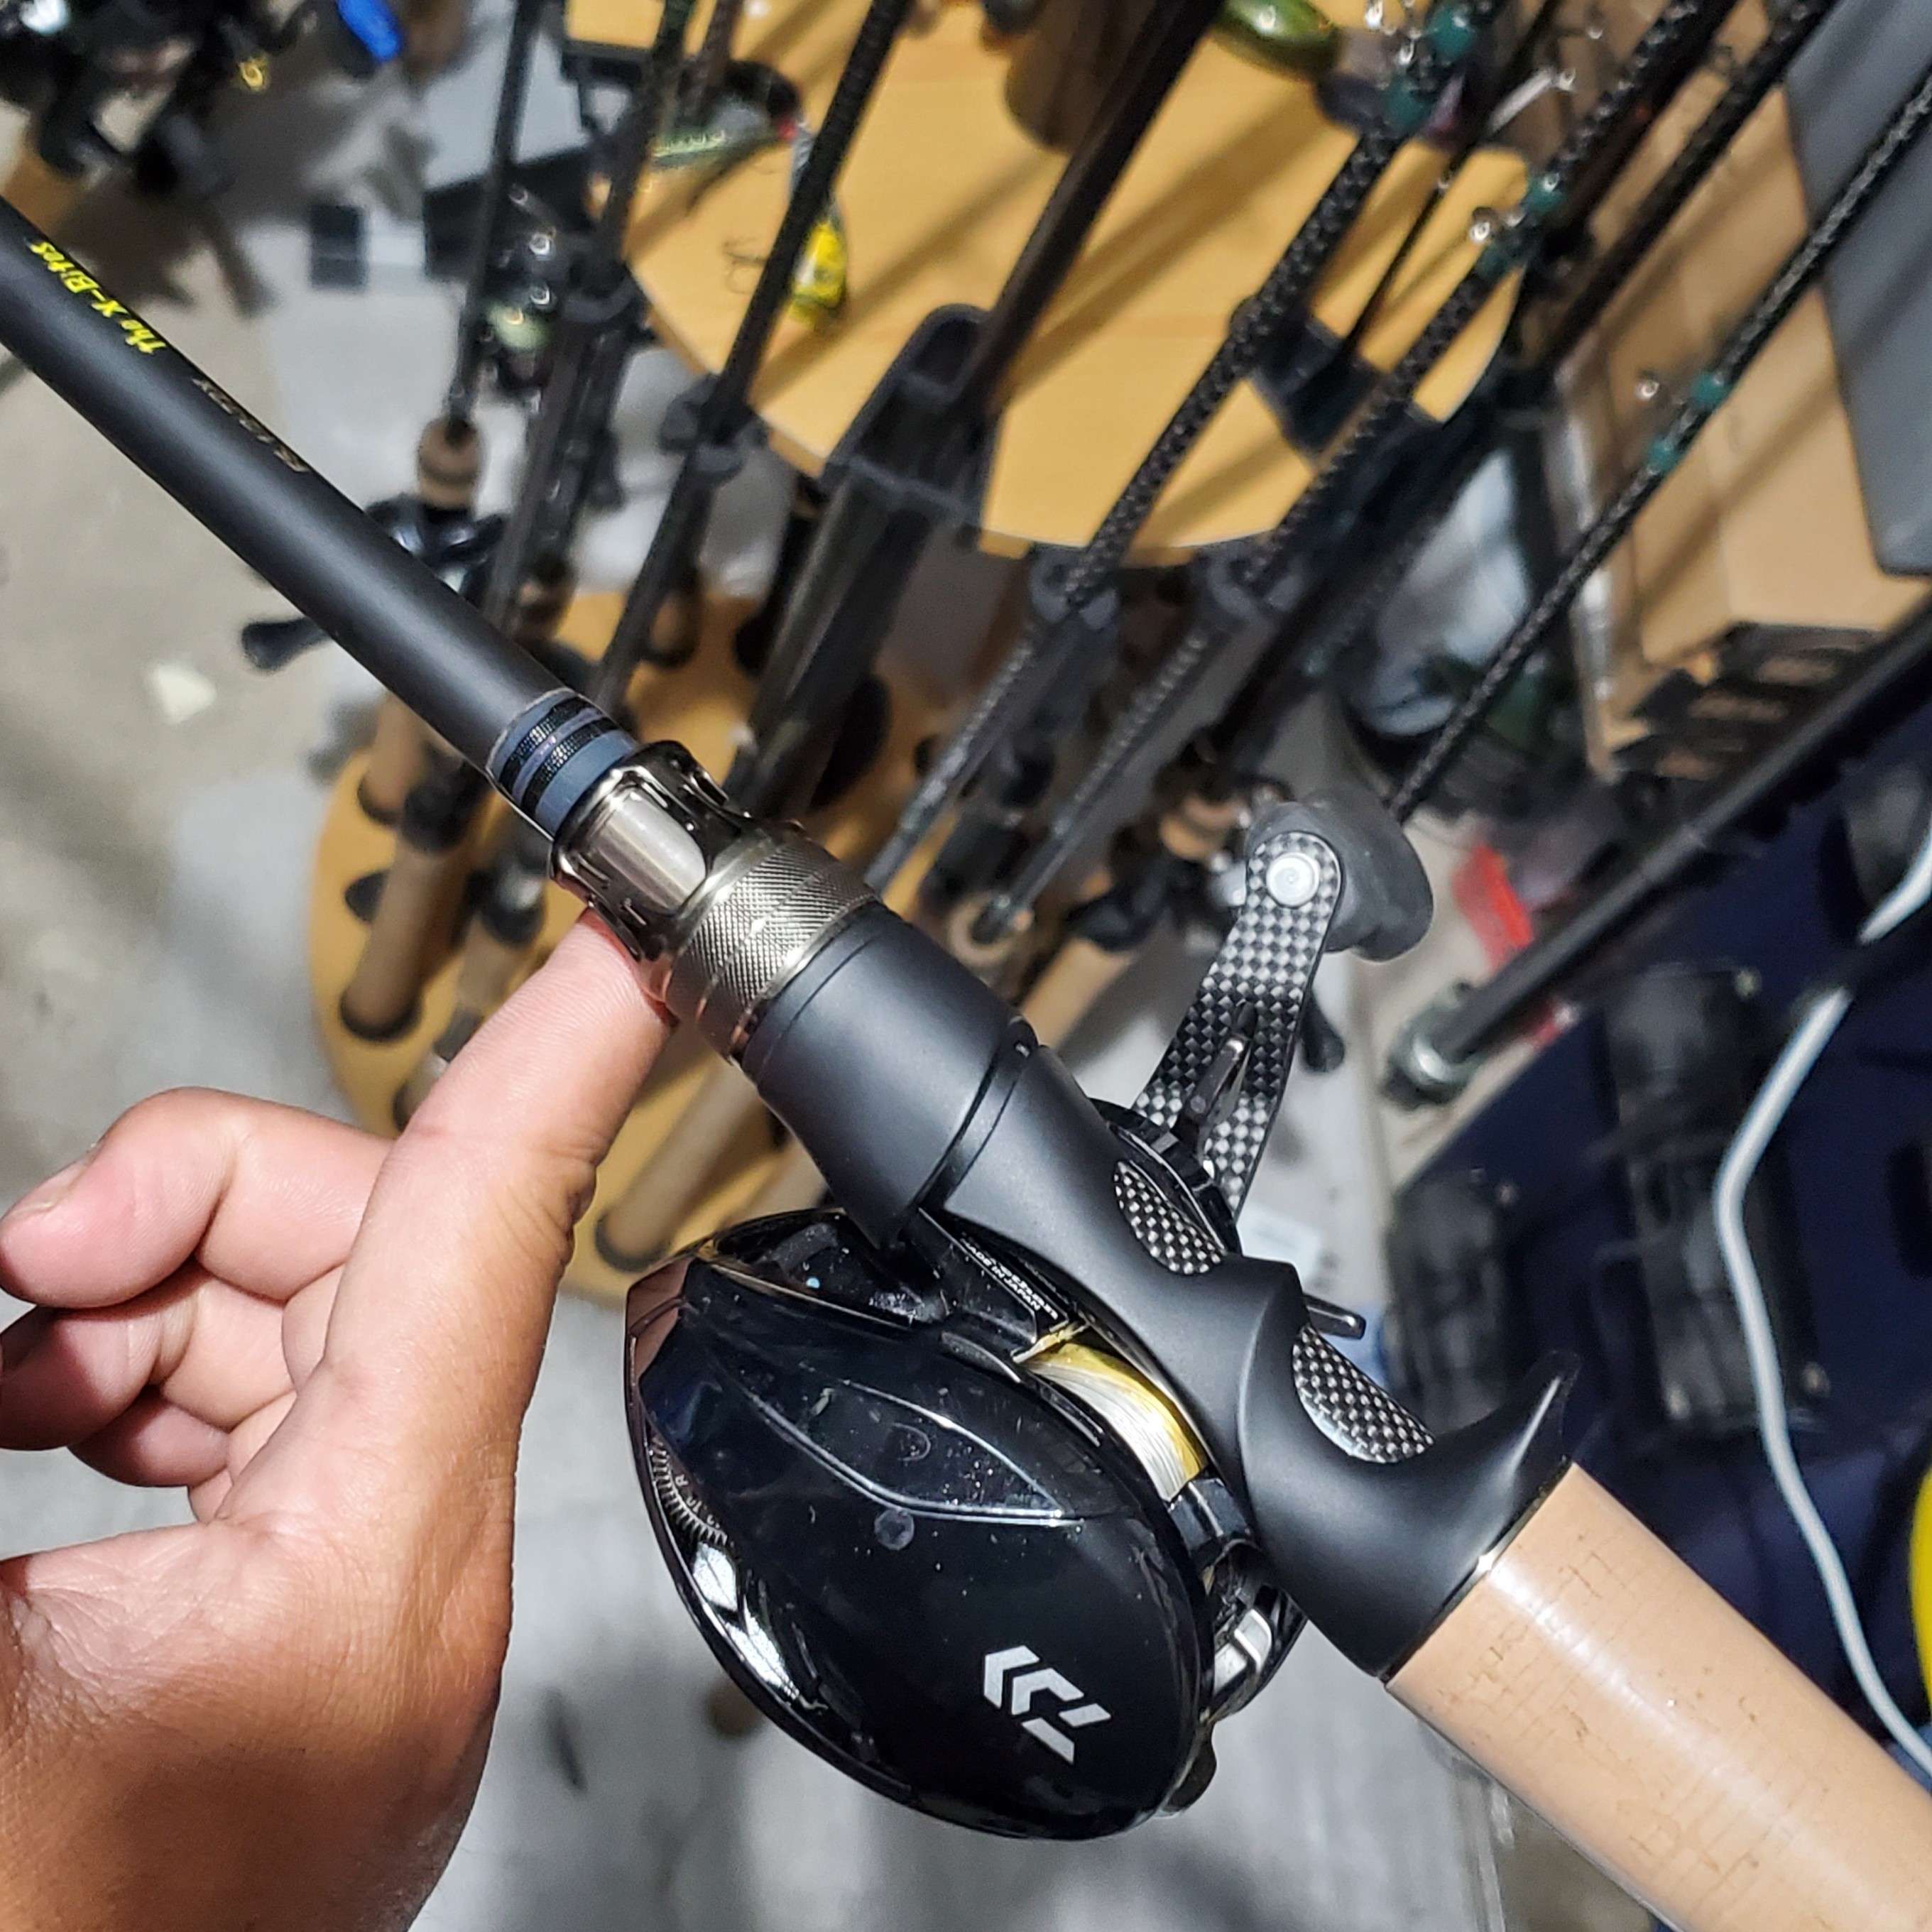 Daiwa Steez AGS 7'5 MHH Bottom Contact Vs NRX 894 - Fishing Rods, Reels,  Line, and Knots - Bass Fishing Forums